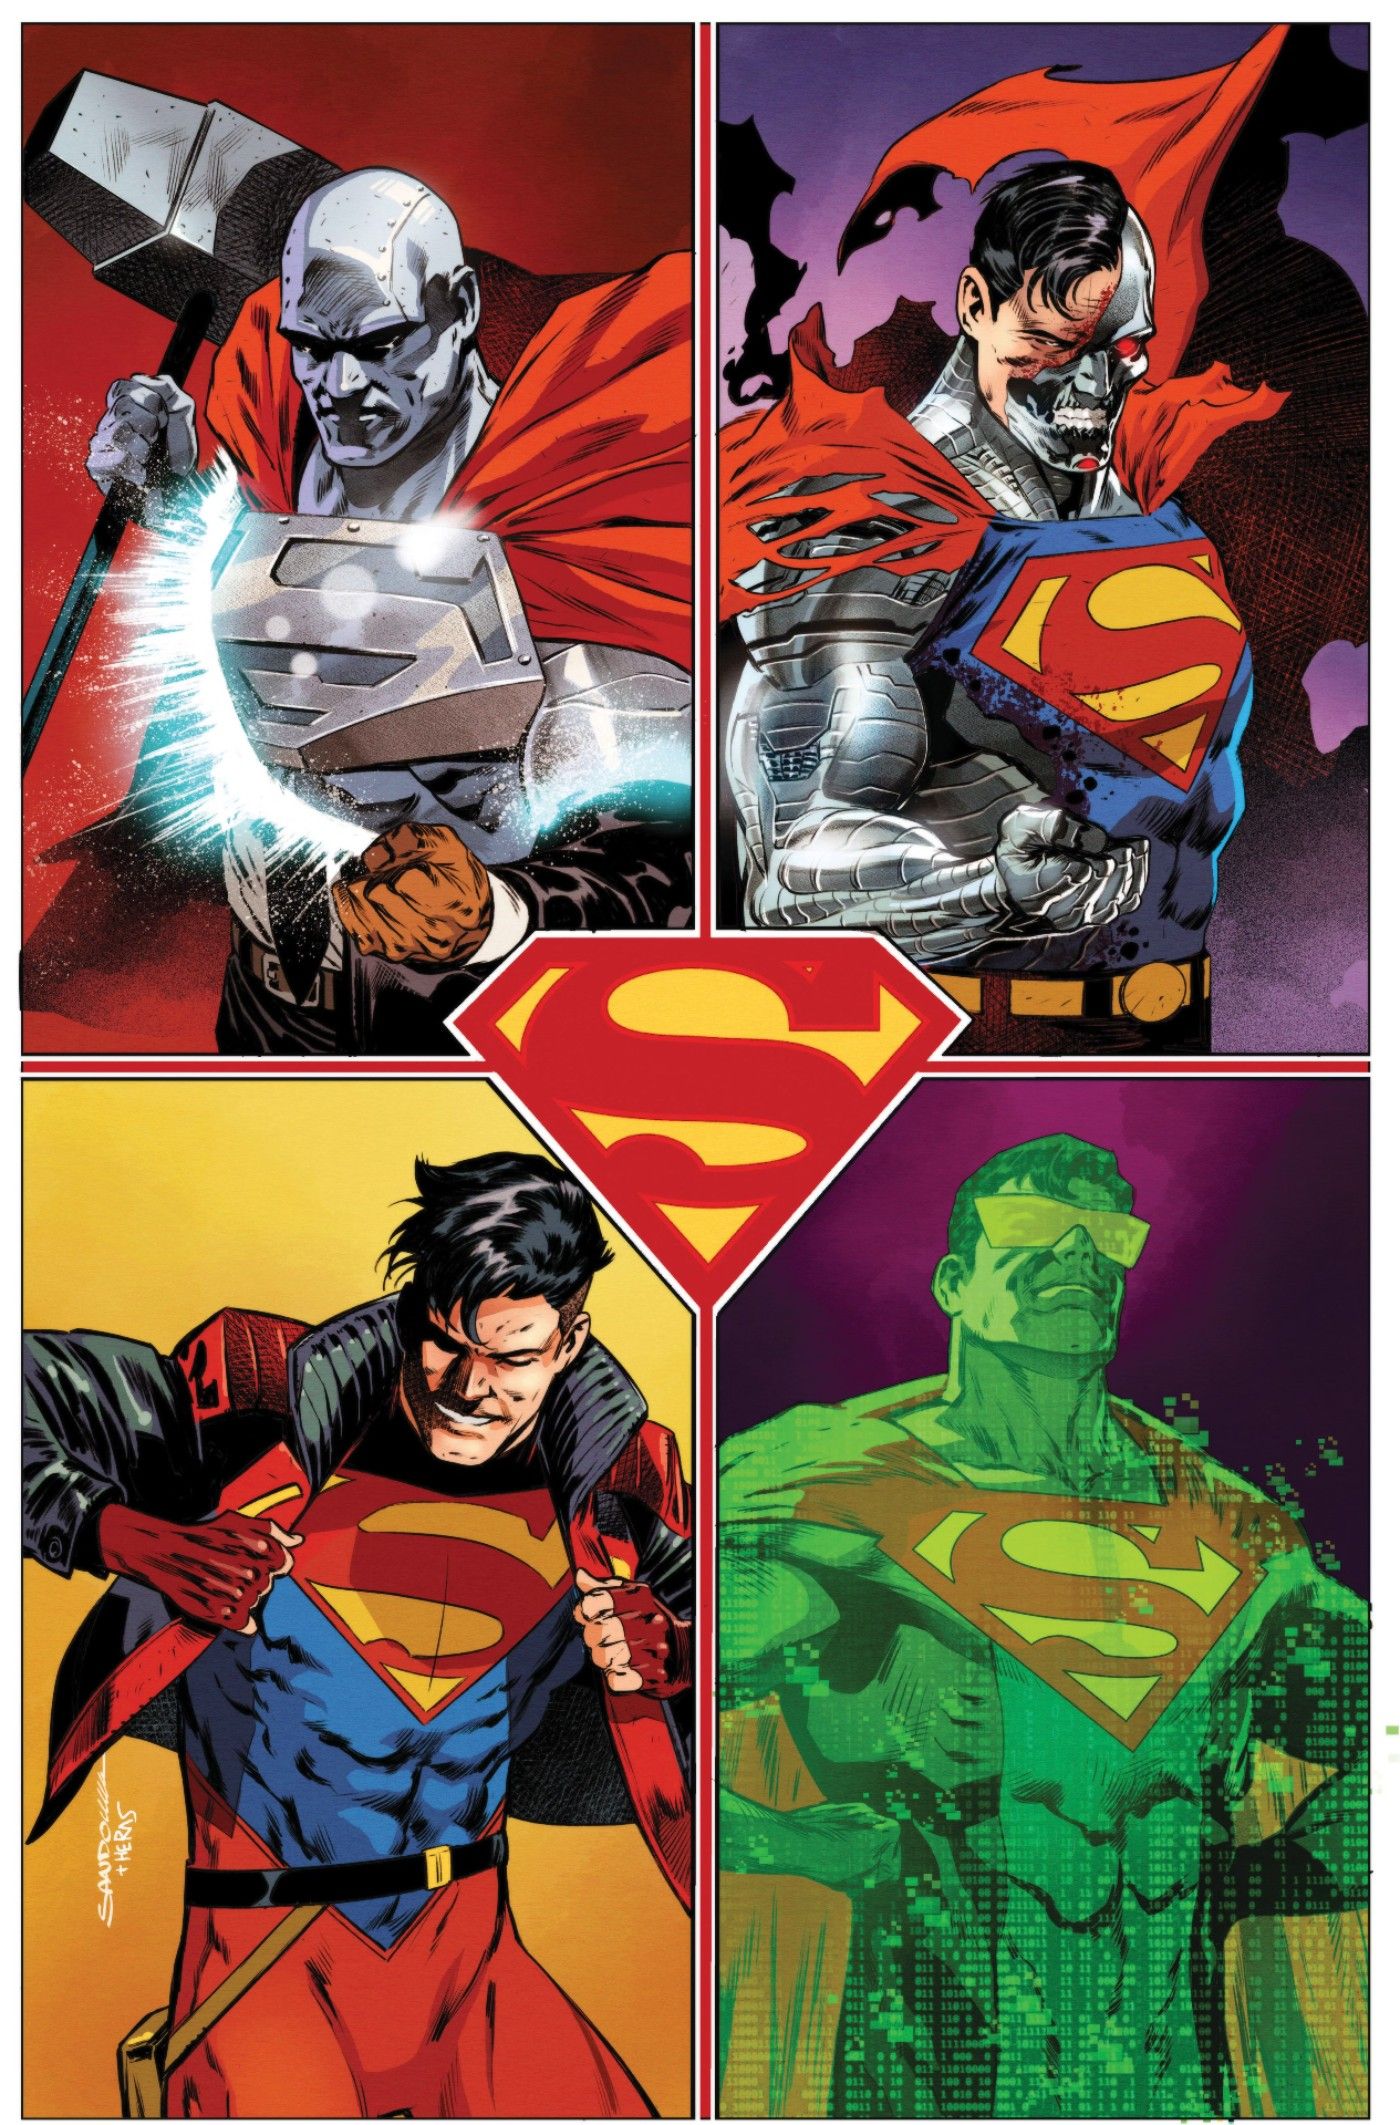 Action Comics Sandoval Variant Cover Featuring Characters from Reign of the Supermen